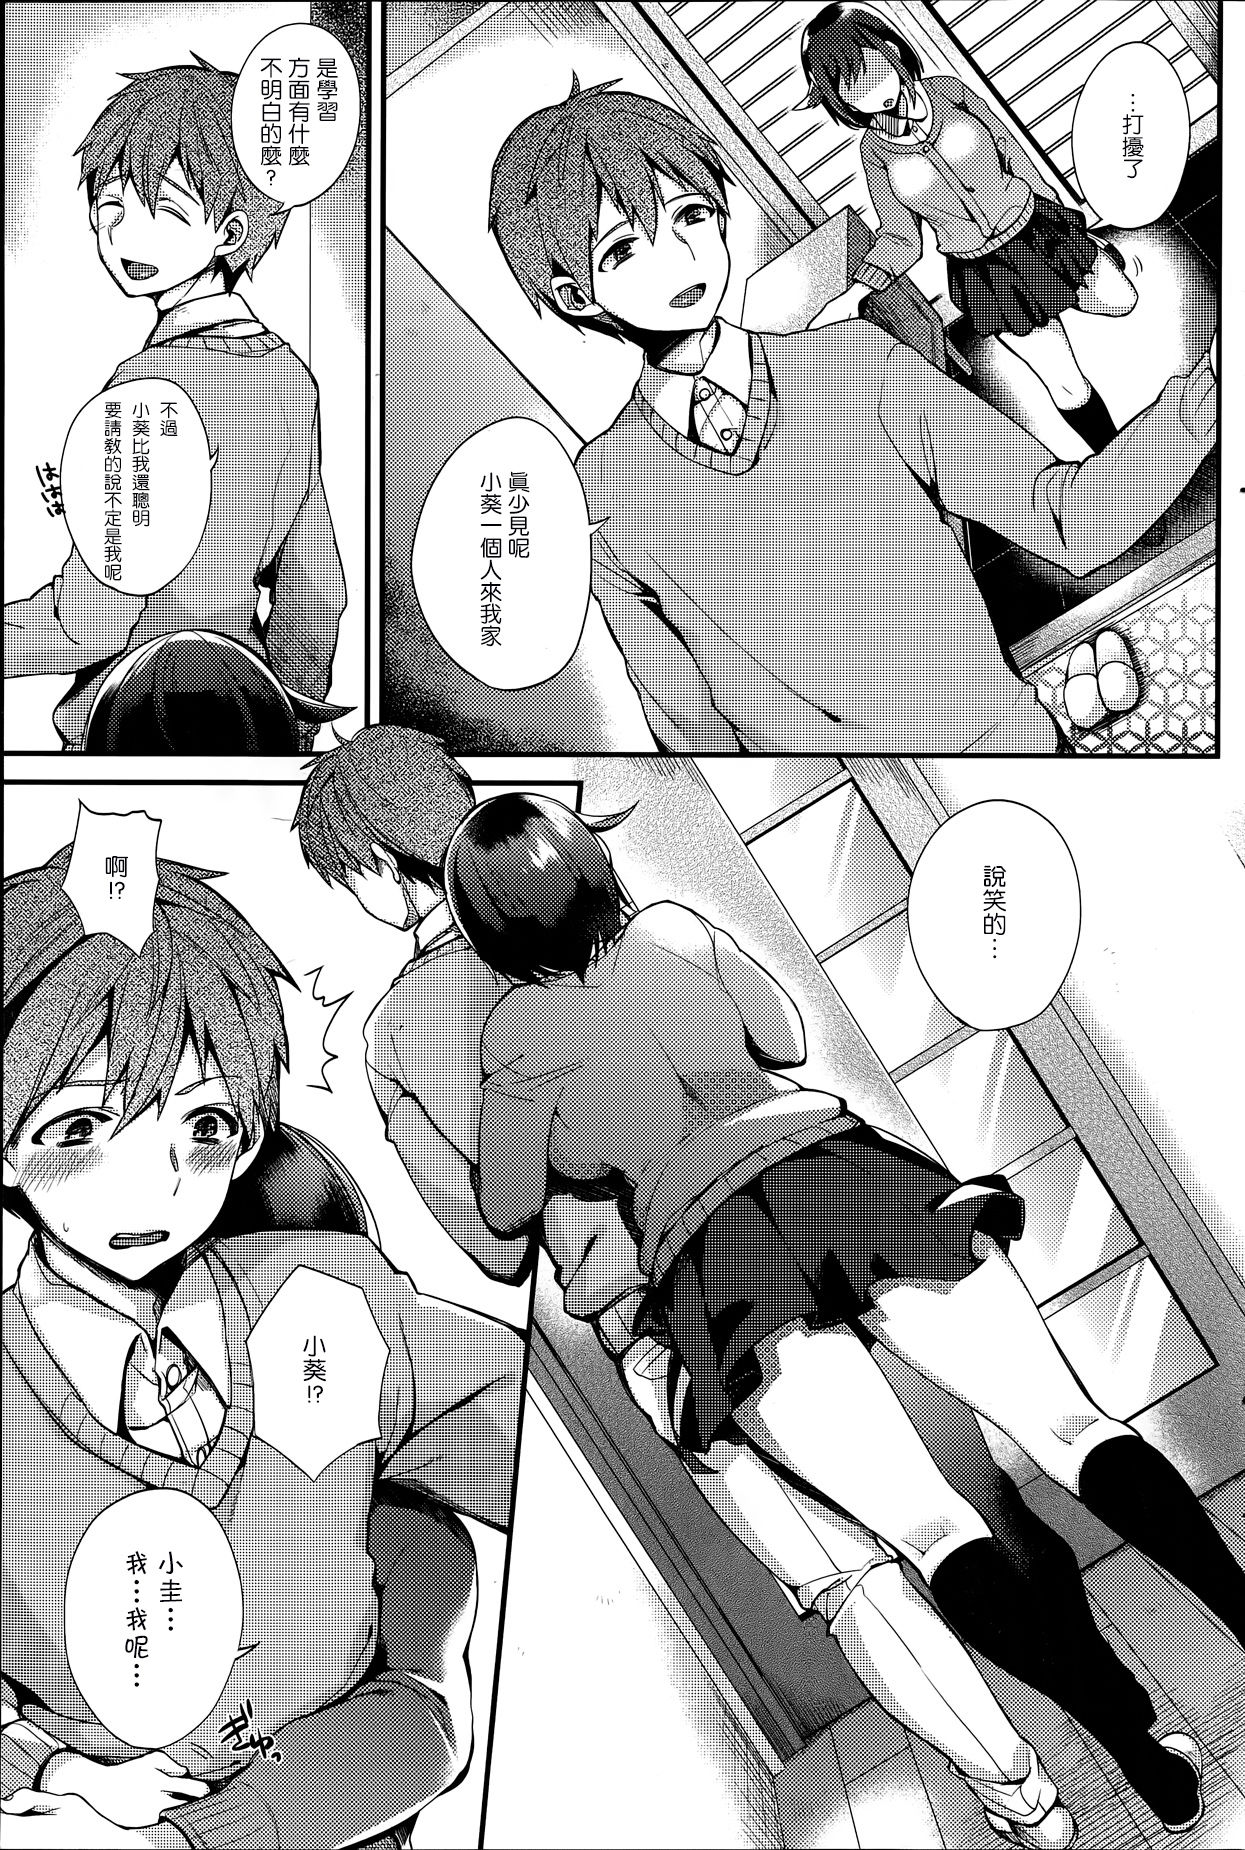 [Shindou] Sisters Conflict (Comic Hotmilk 2014-06) [Chinese] [无毒汉化组] [しんどう] Sisters Conflict (コミックホットミルク 2014年6月号) [中文翻譯]